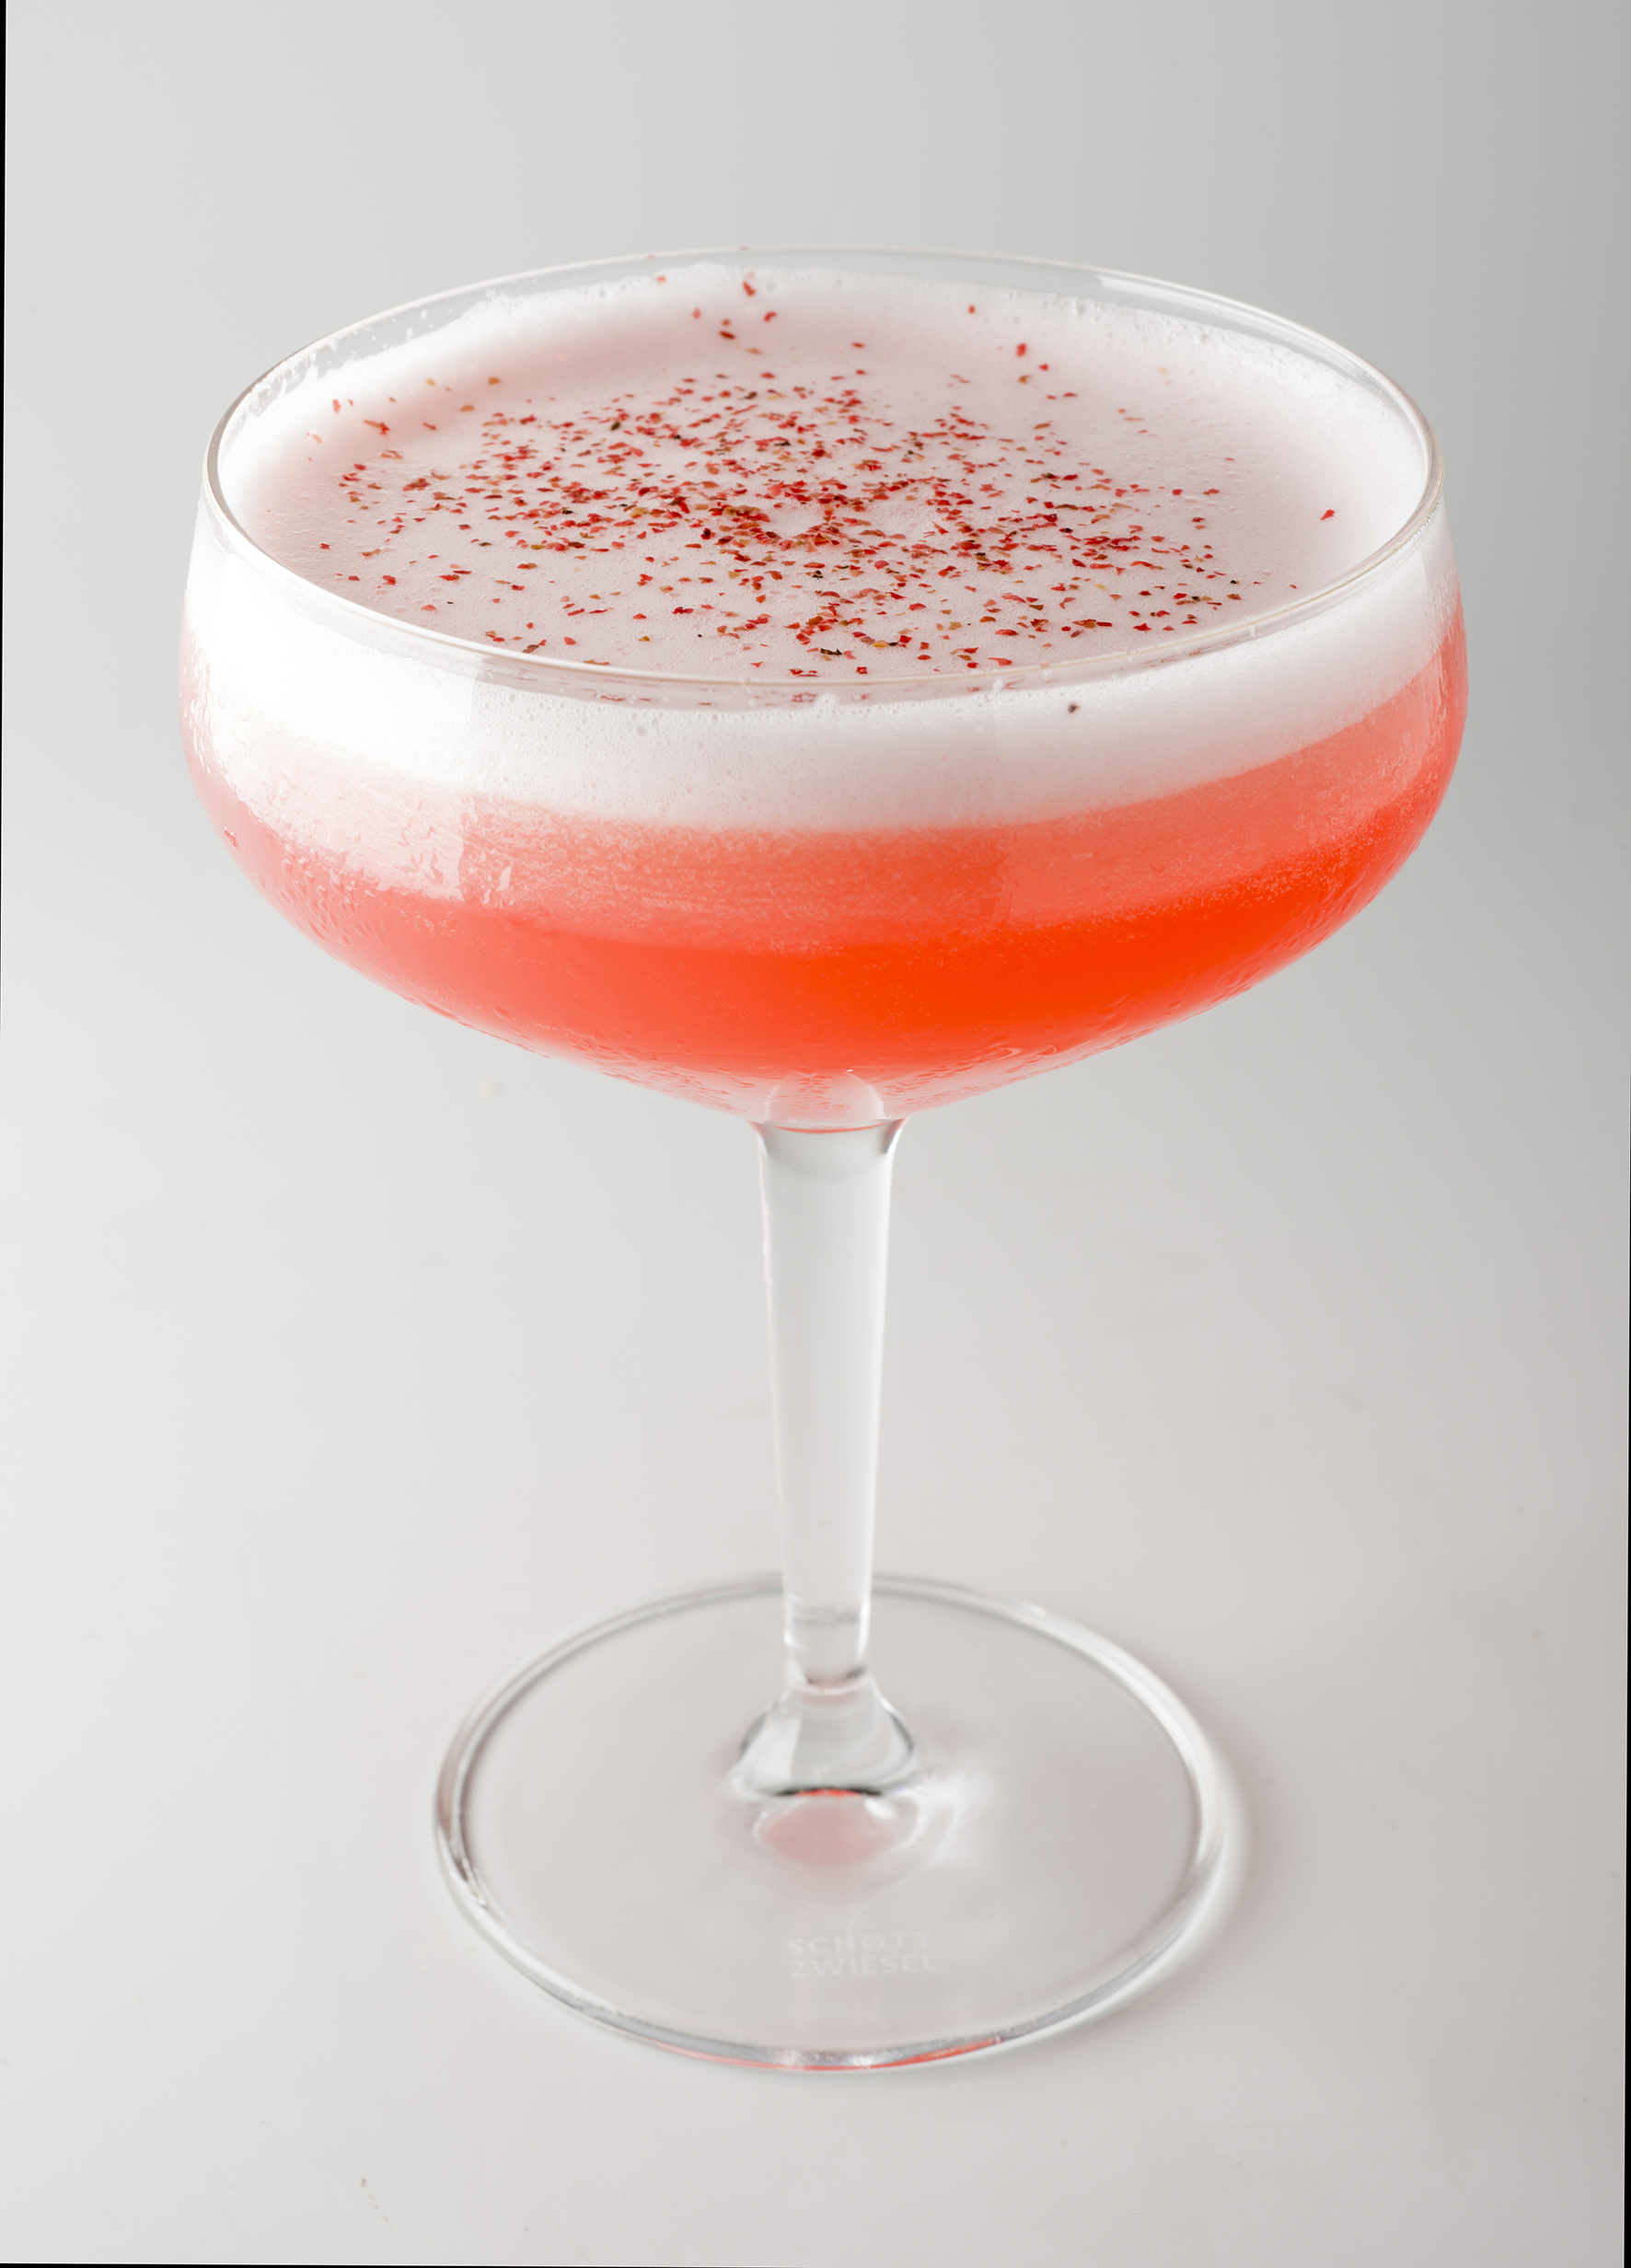 Le cocktail Madame Rose